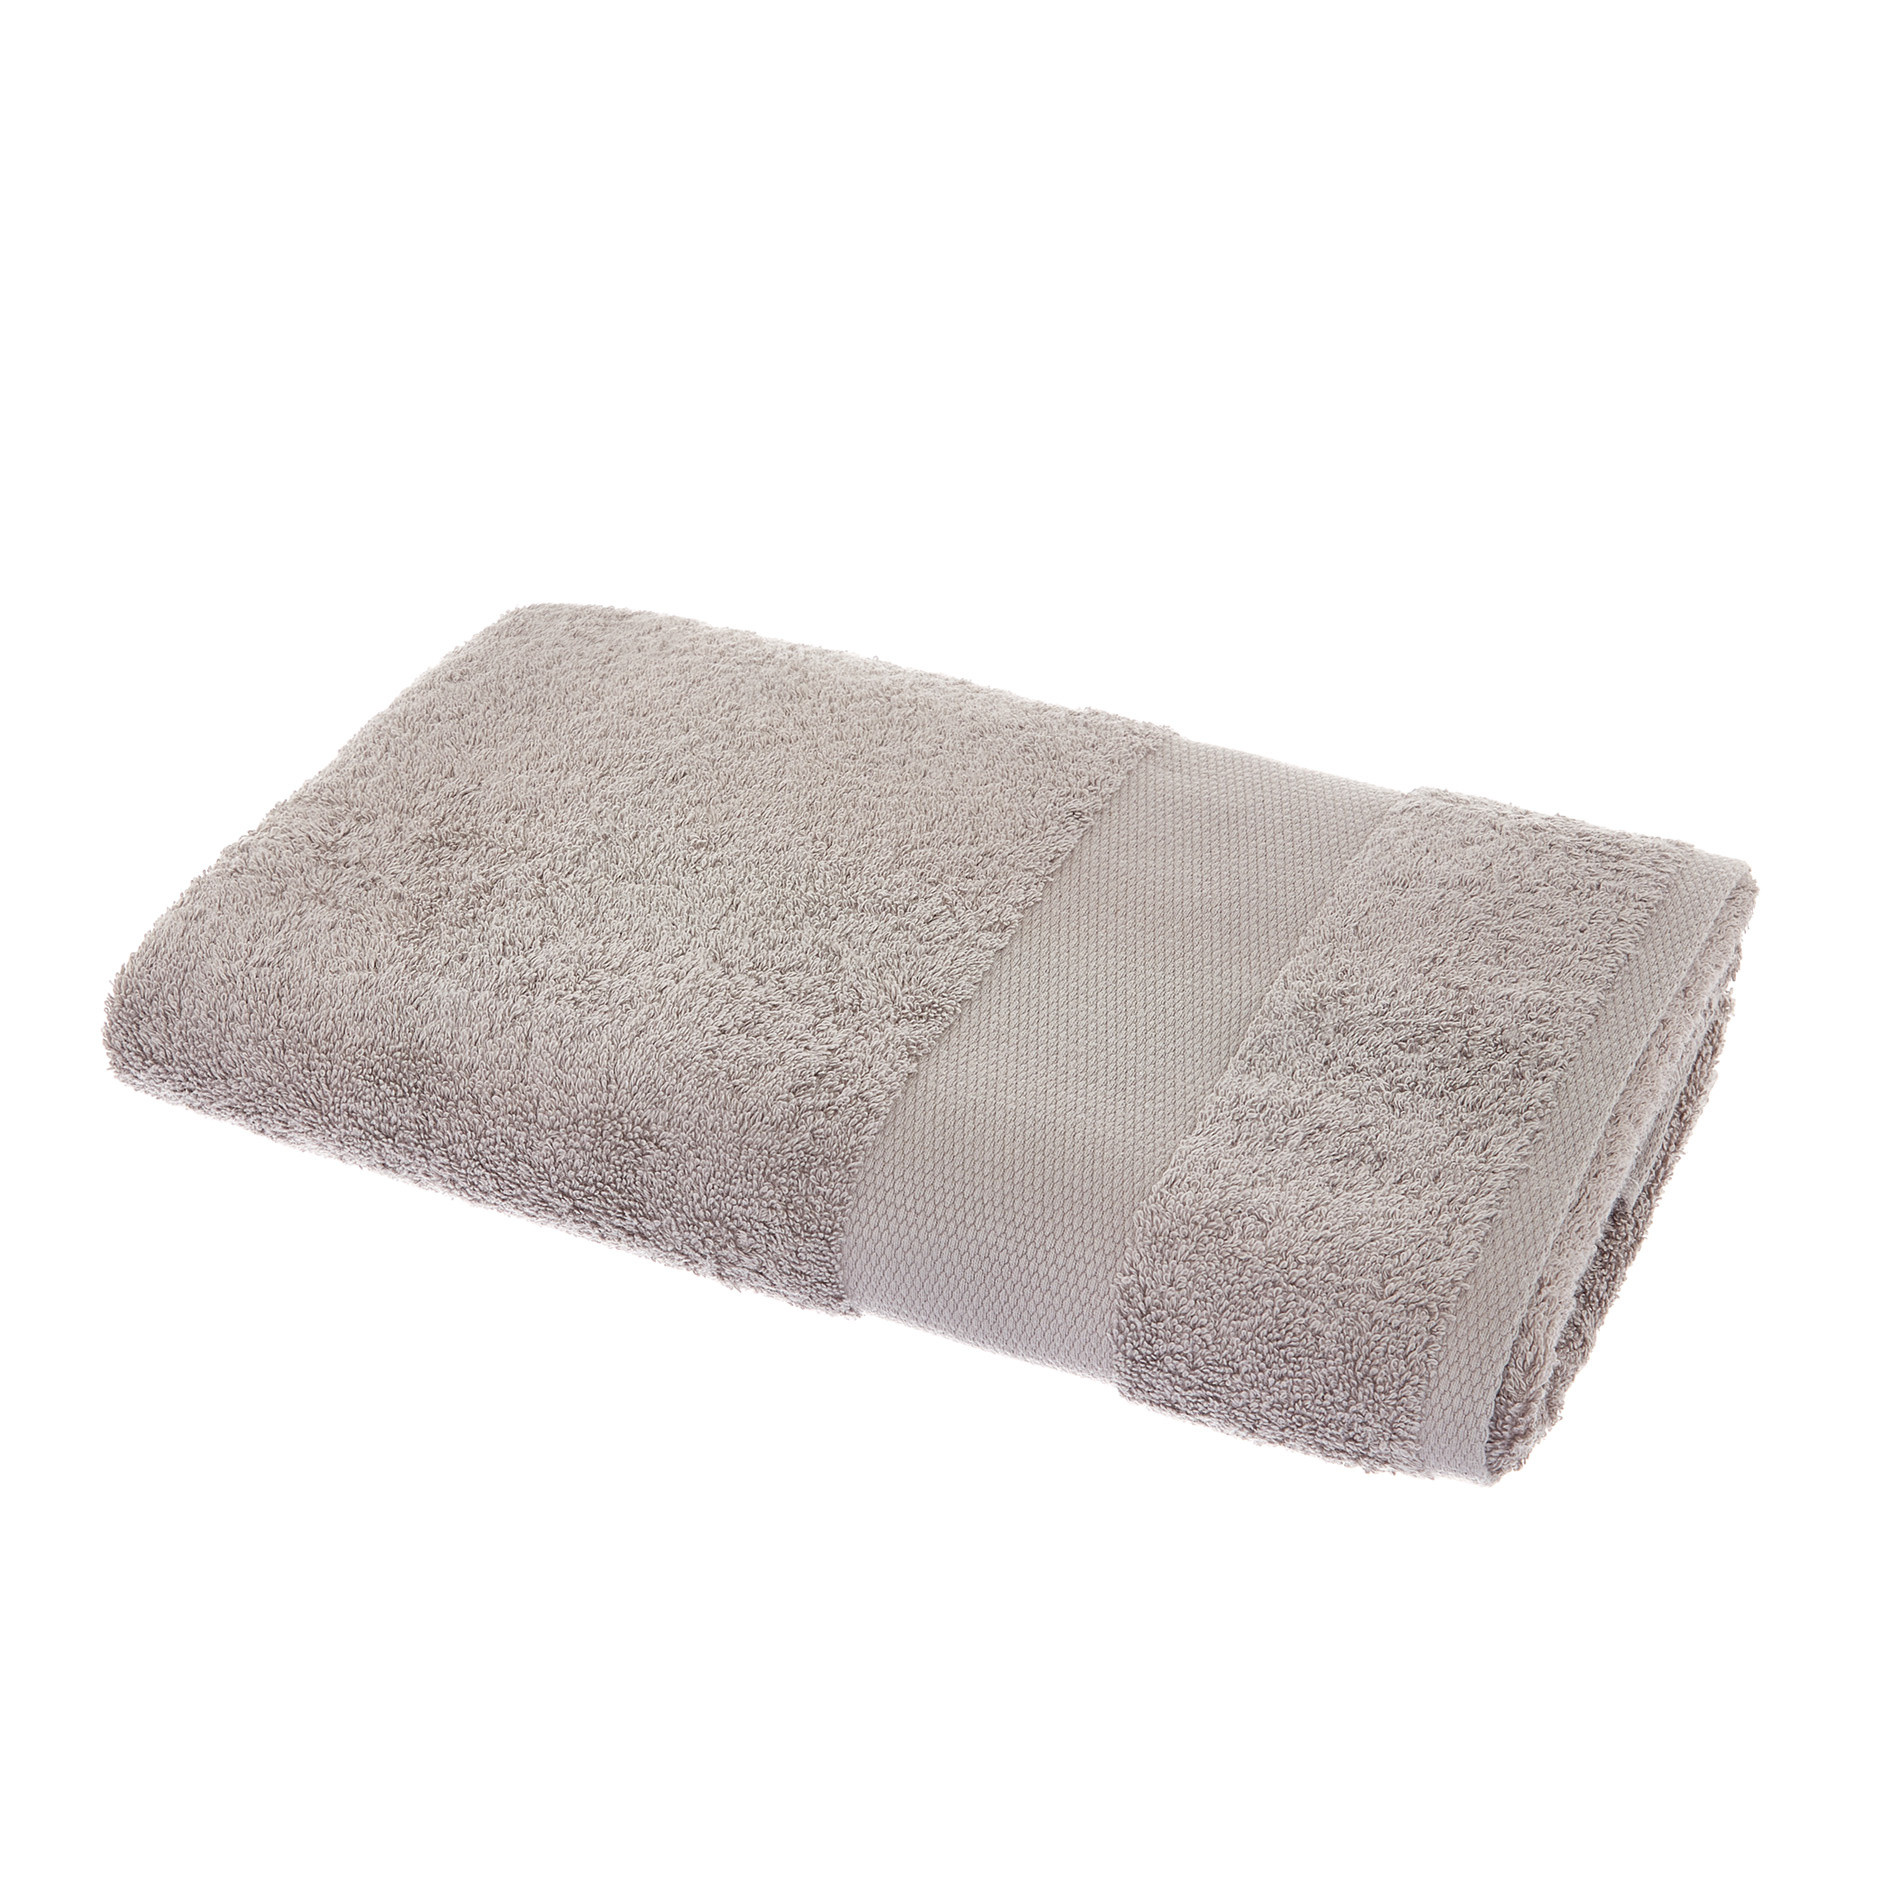 Zefiro pure cotton terry towel, Grey, large image number 1